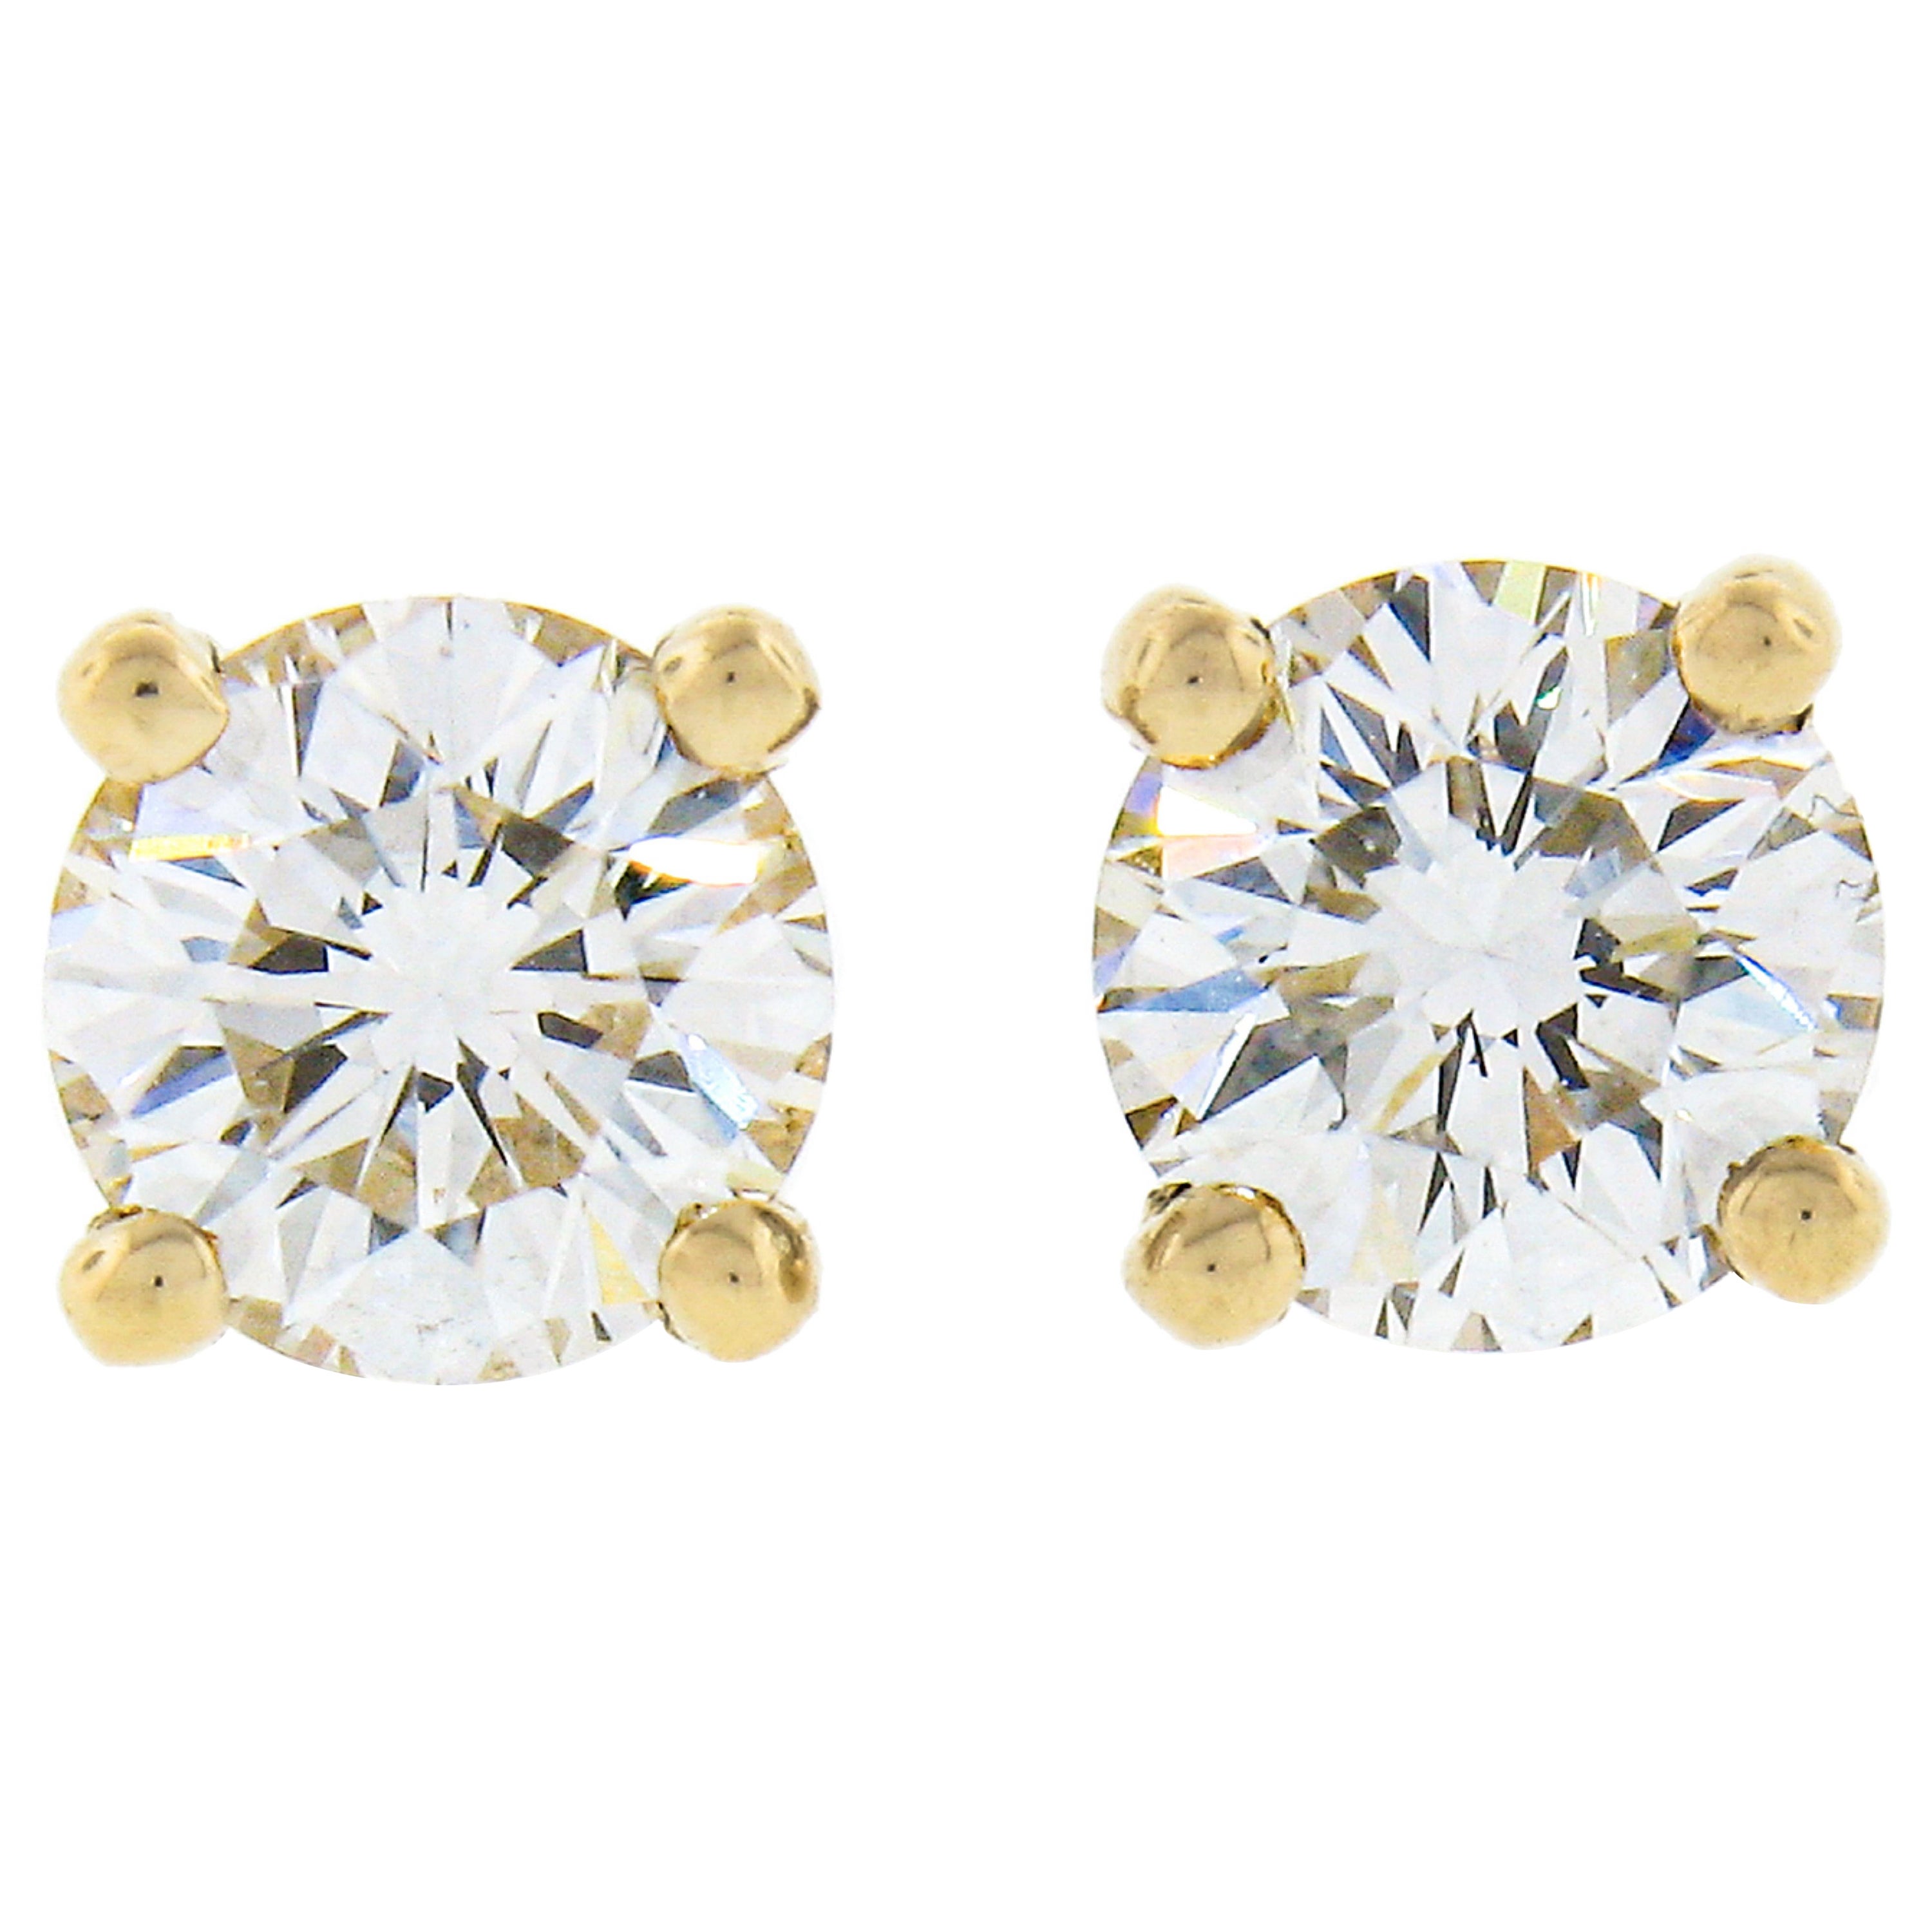 New Classic 14k Yellow Gold 0.50ct Round Ideal Cut Diamond 4-Prong Stud Earrings